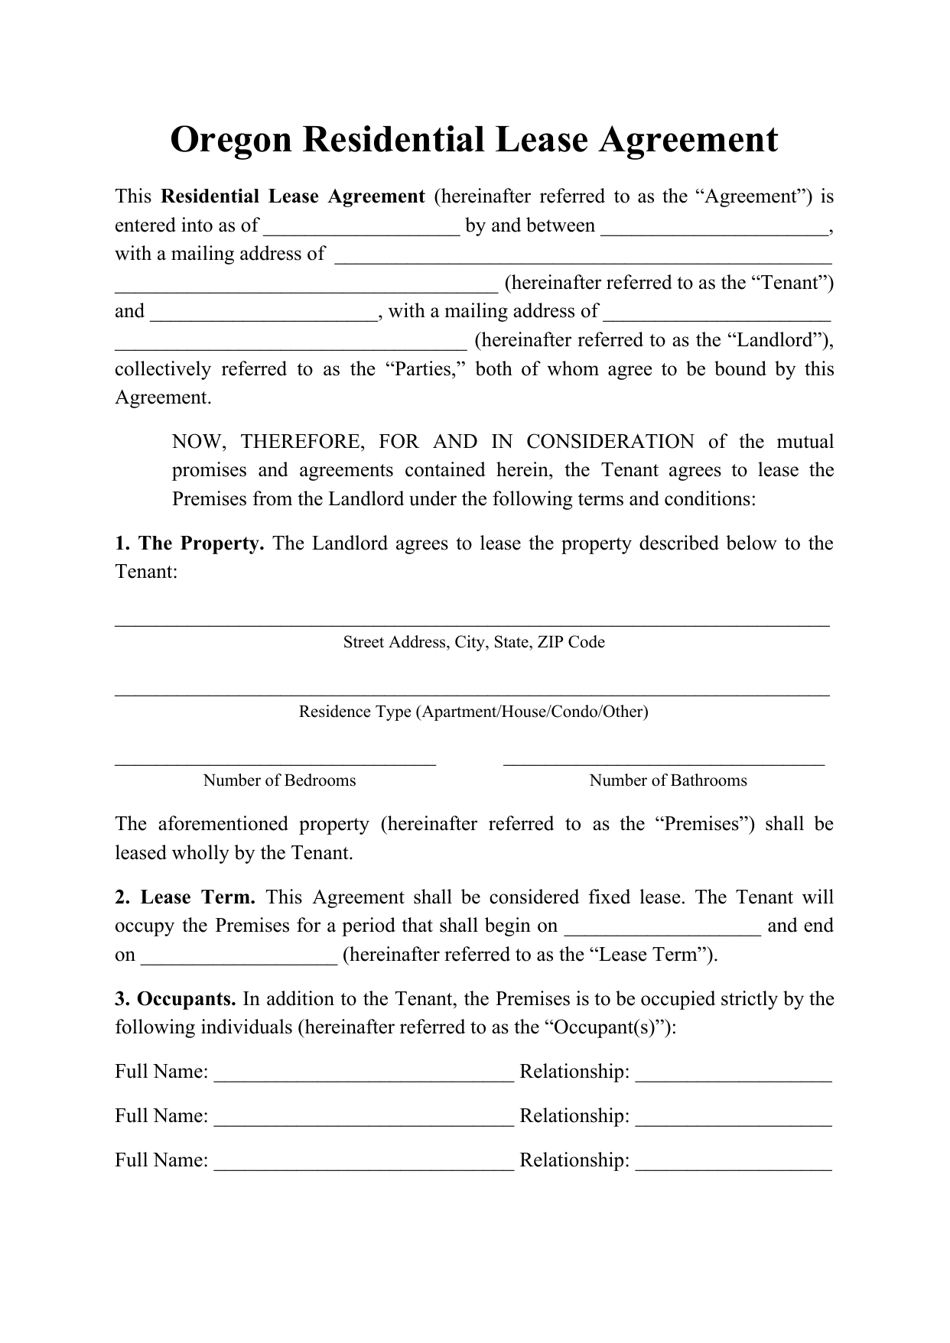 Residential Lease Agreement Template - Oregon, Page 1